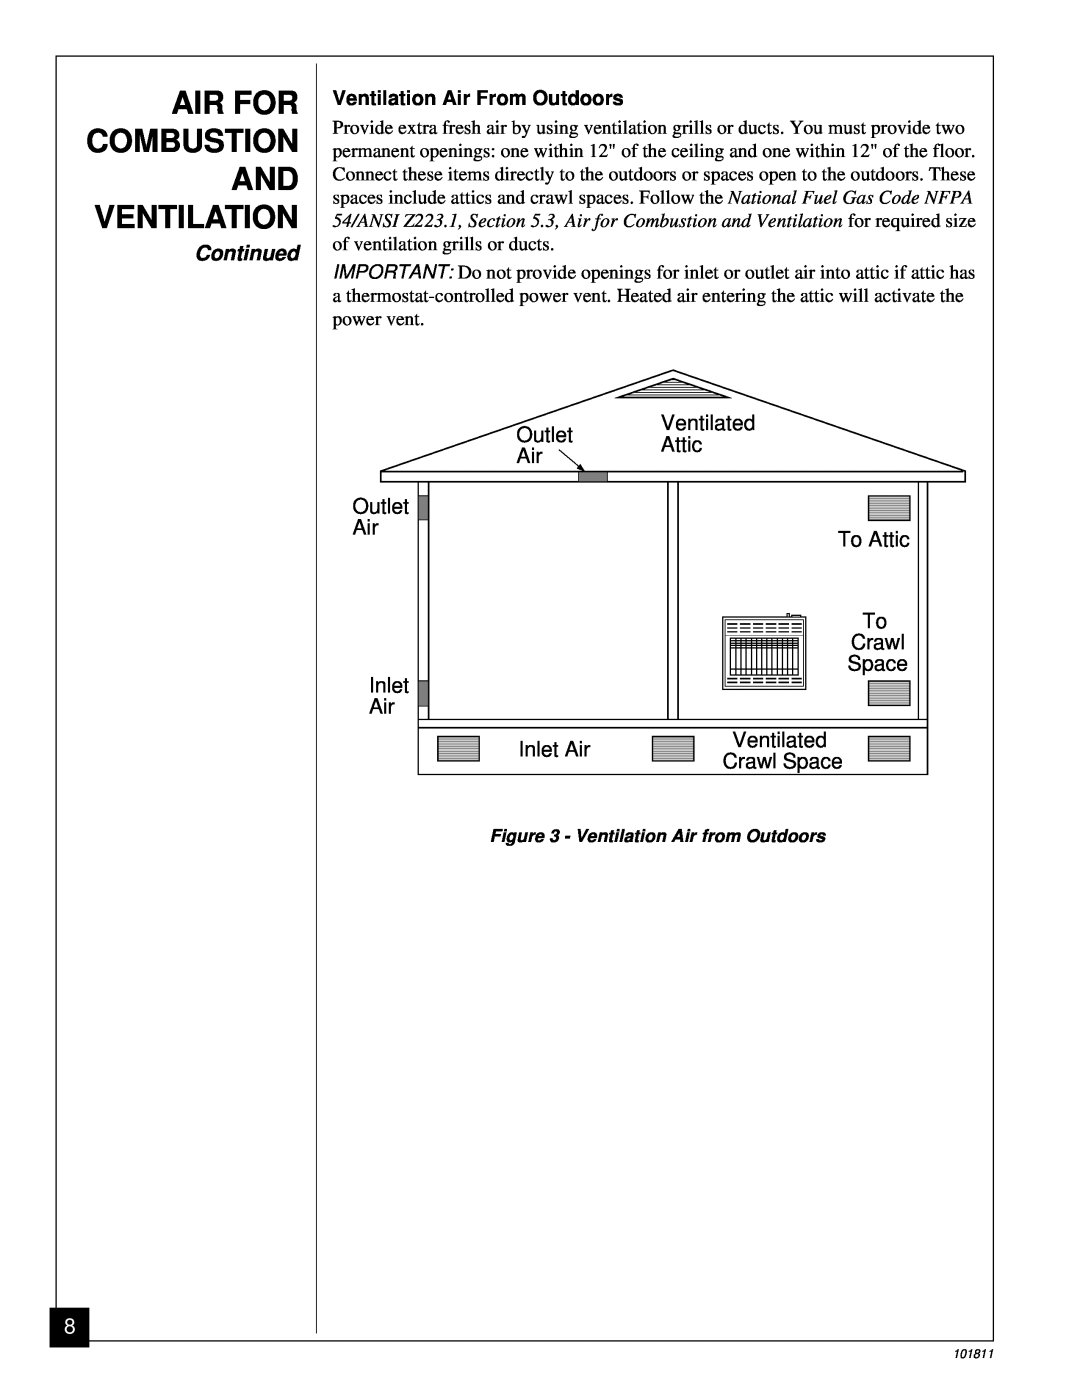 Desa 101811-01C.pdf Air For Combustion And Ventilation, Continued, Ventilated Outlet Attic Air, To Attic, Inlet Air 